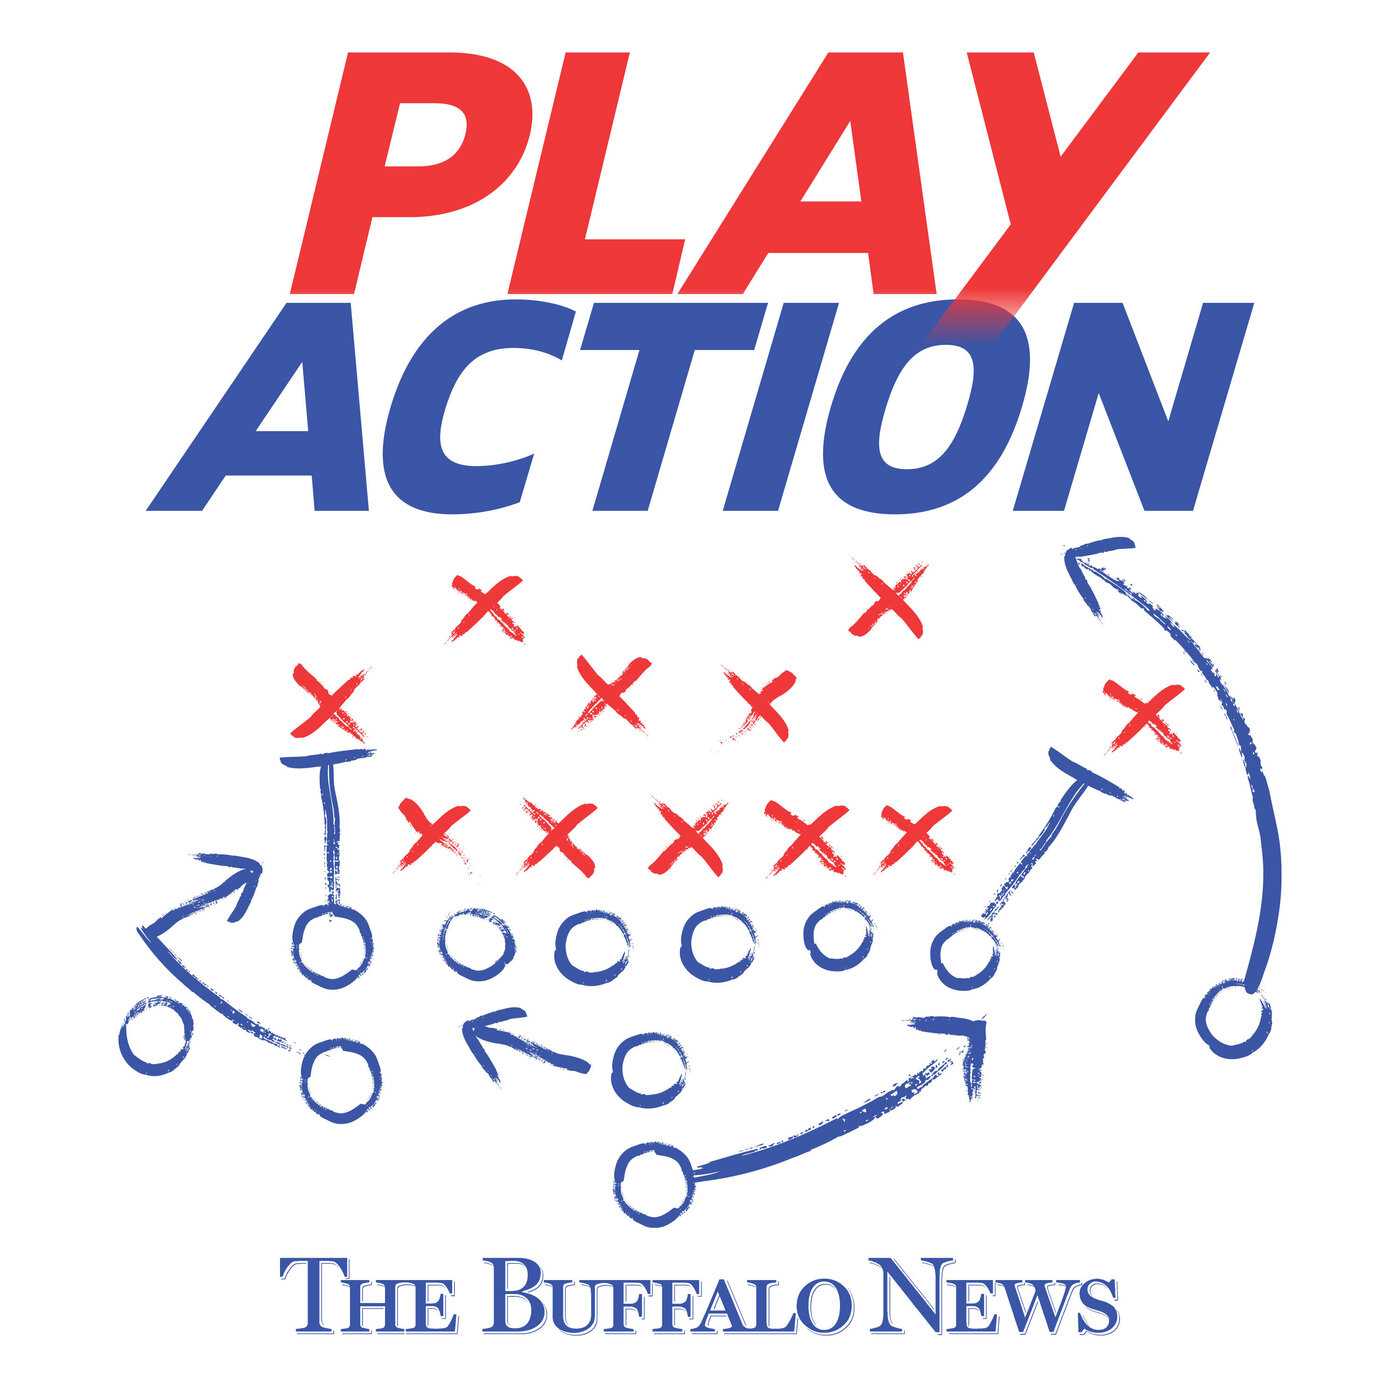 With Josh Allen at his best the Bills look to beat the Chiefs in Buffalo